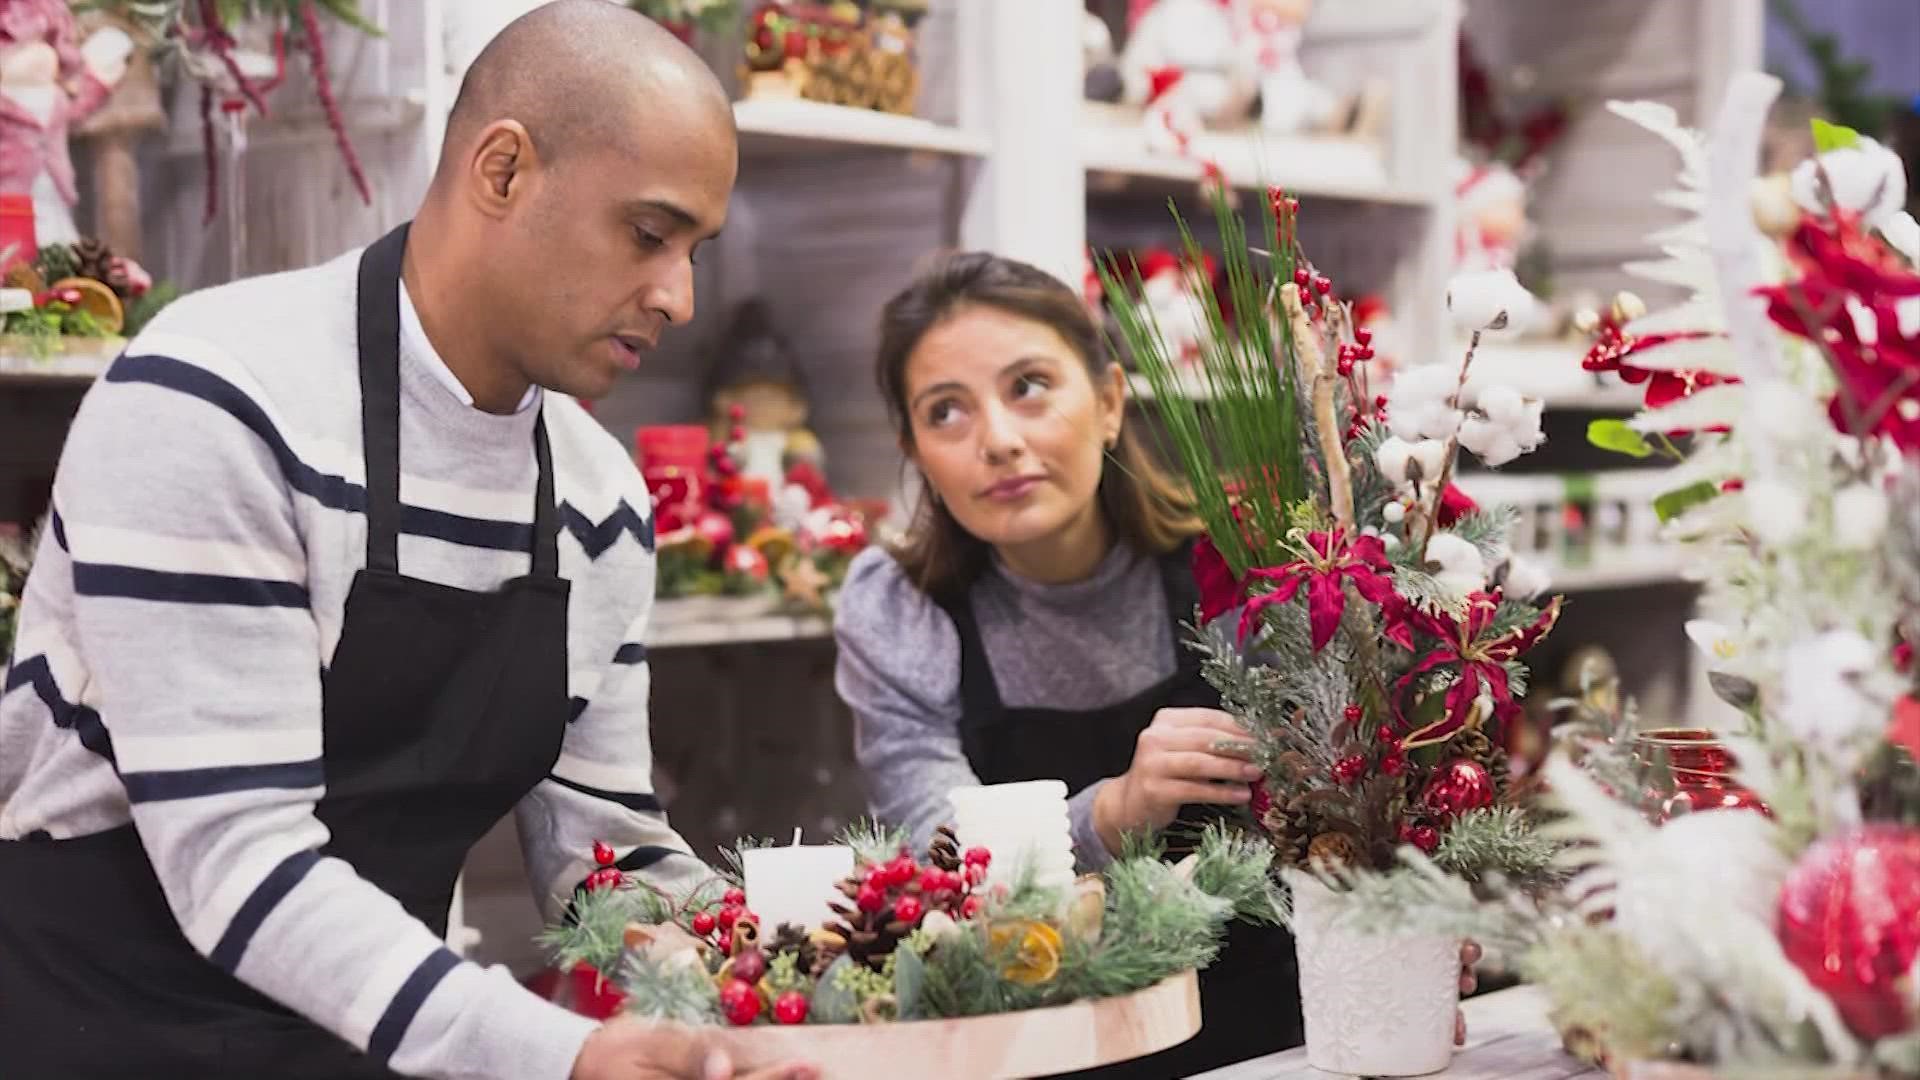 Employers looking for seasonal workers are finding it tough.